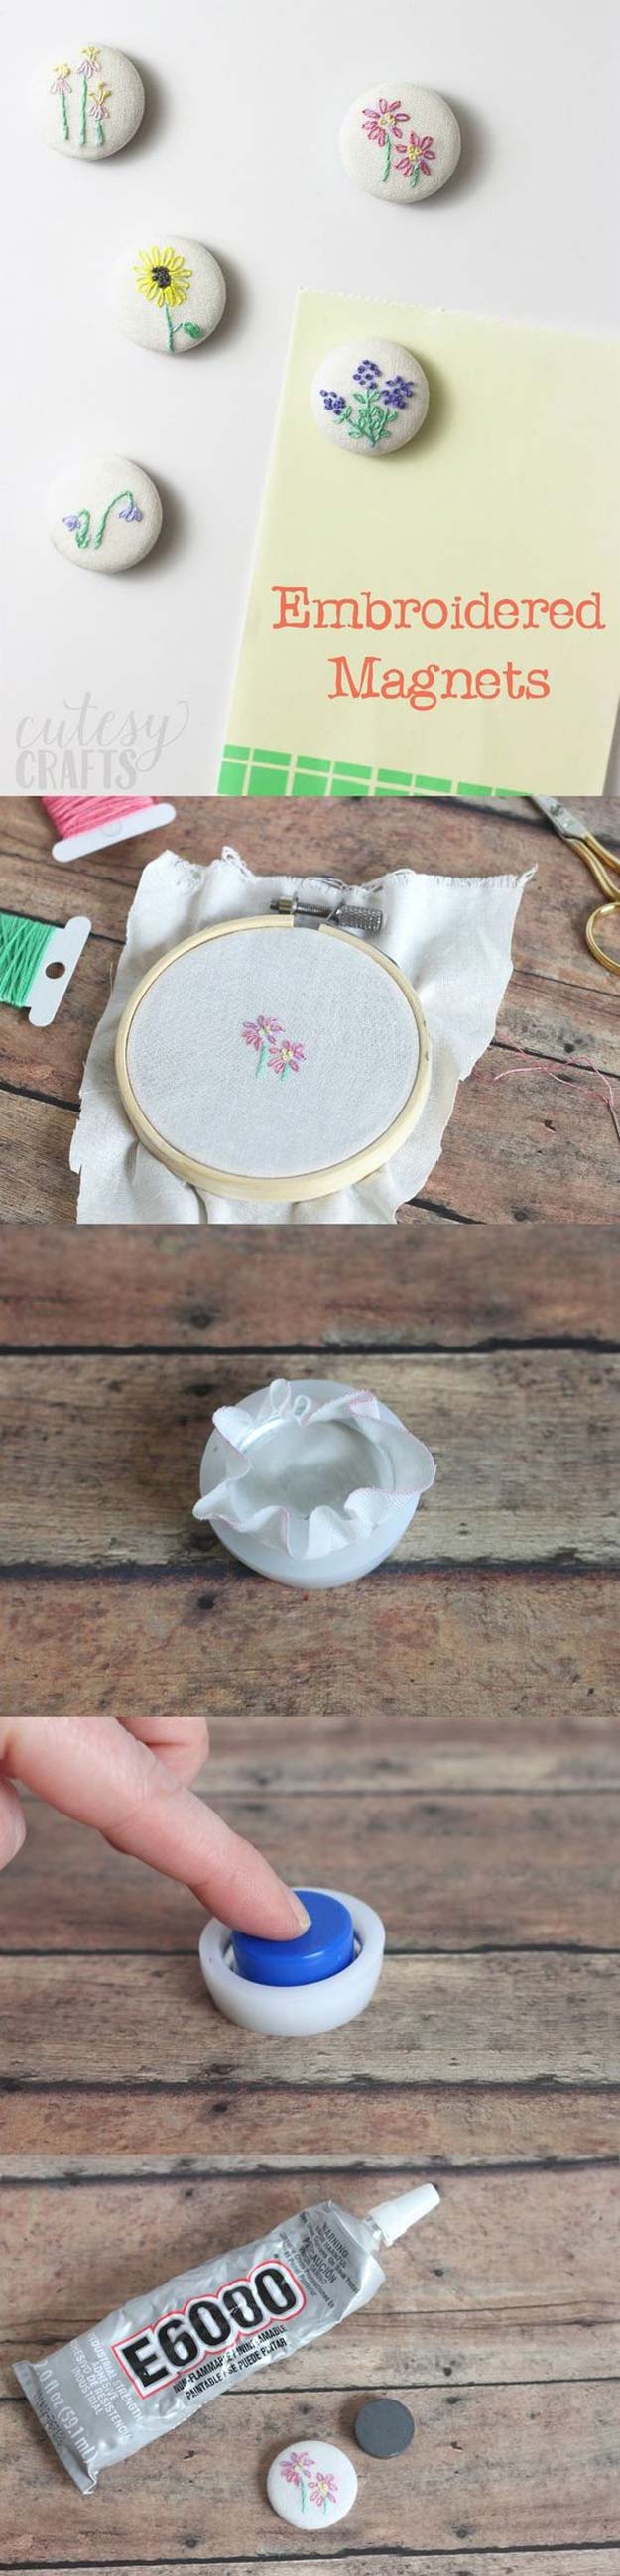 Cool Embroidery Projects for Teens - Step by Step Embroidery Tutorials - DIY Magnets with Hand Embroidery - Awesome Embroidery Projects for Teenagers - Cool Embroidery Crafts for Girls - Creative Embroidery Designs - Best Embroidery Wall Art, Room Decor - Great Embroidery Gifts, Free Embroidery Patterns for Girls, Women and Tweens 